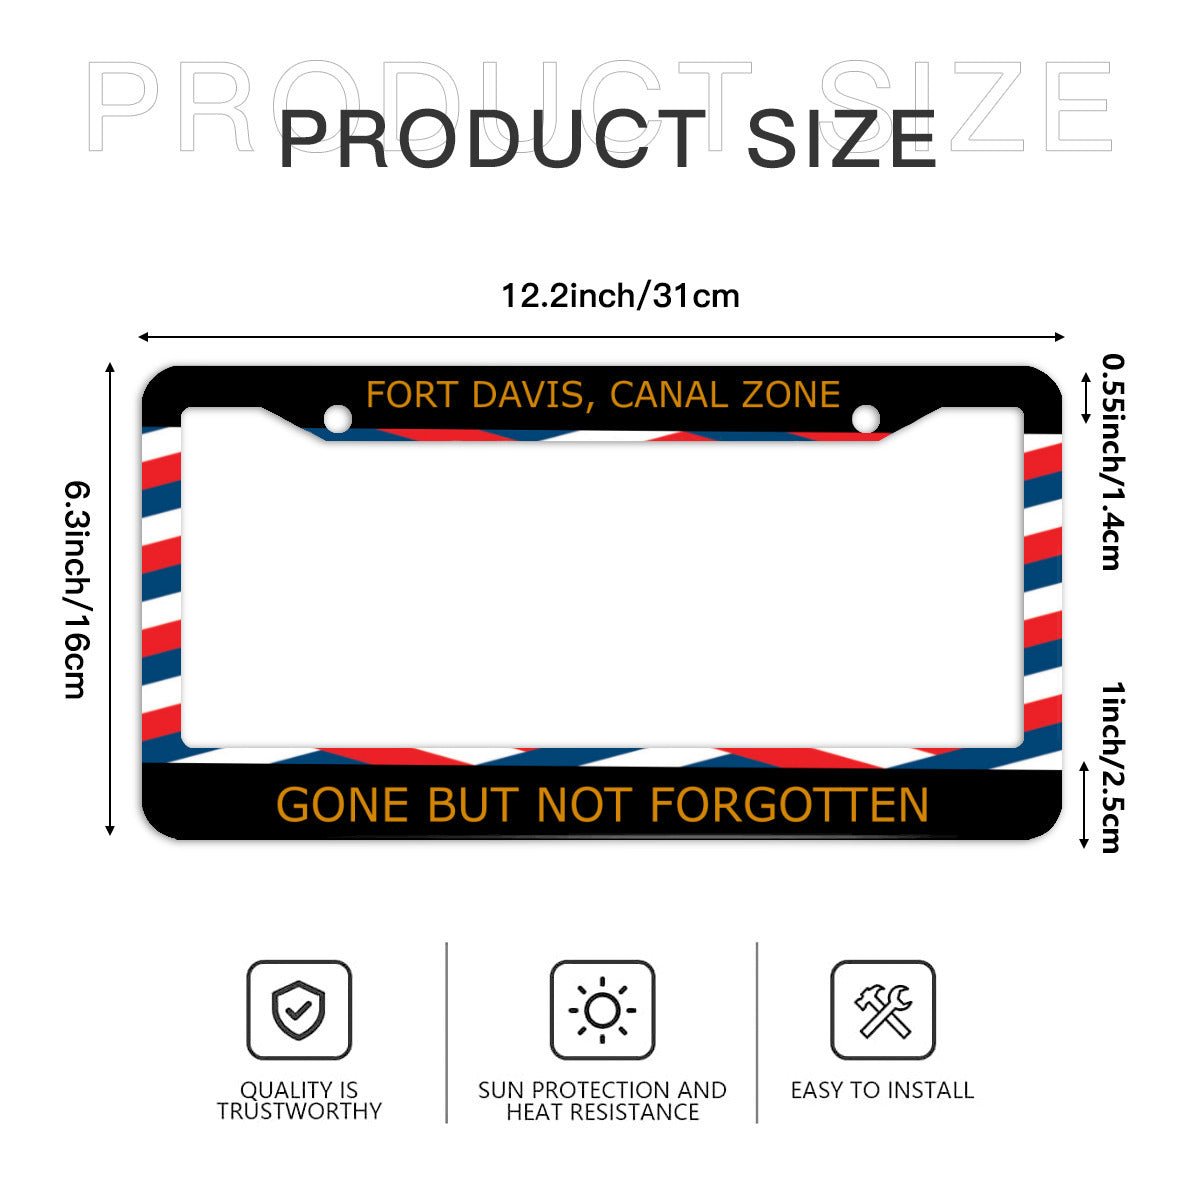 Standard 2-hole U.S. License plate frame cover - Ft Davis, gone but not forgotten - SHIPPING INCLUDED